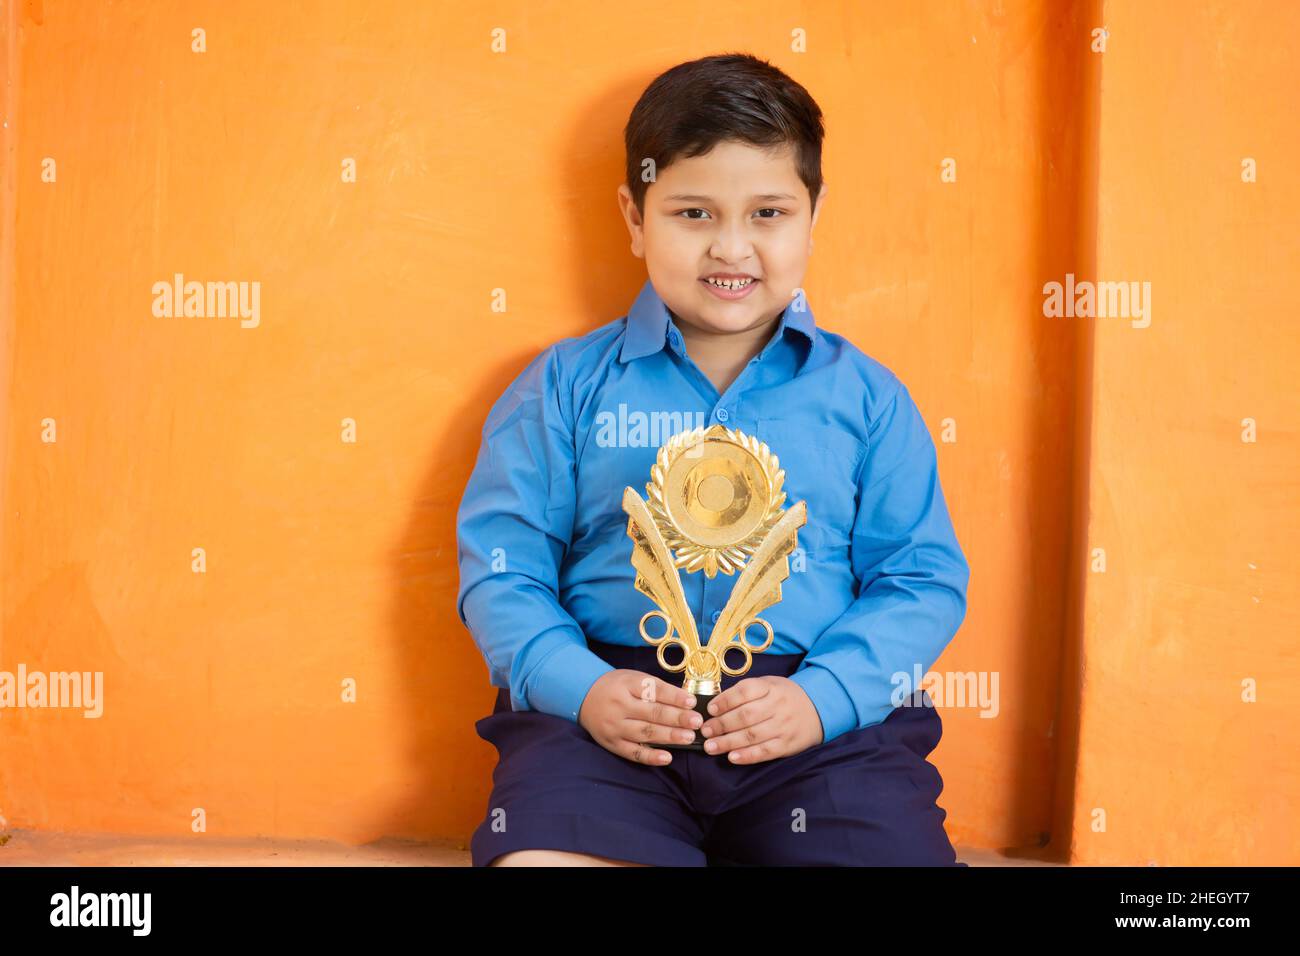 Portrait of happy adorable cute indian boy in school uniform celebrating victory with trophy,Cheerful male kid holding winning prize against orange ba Stock Photo